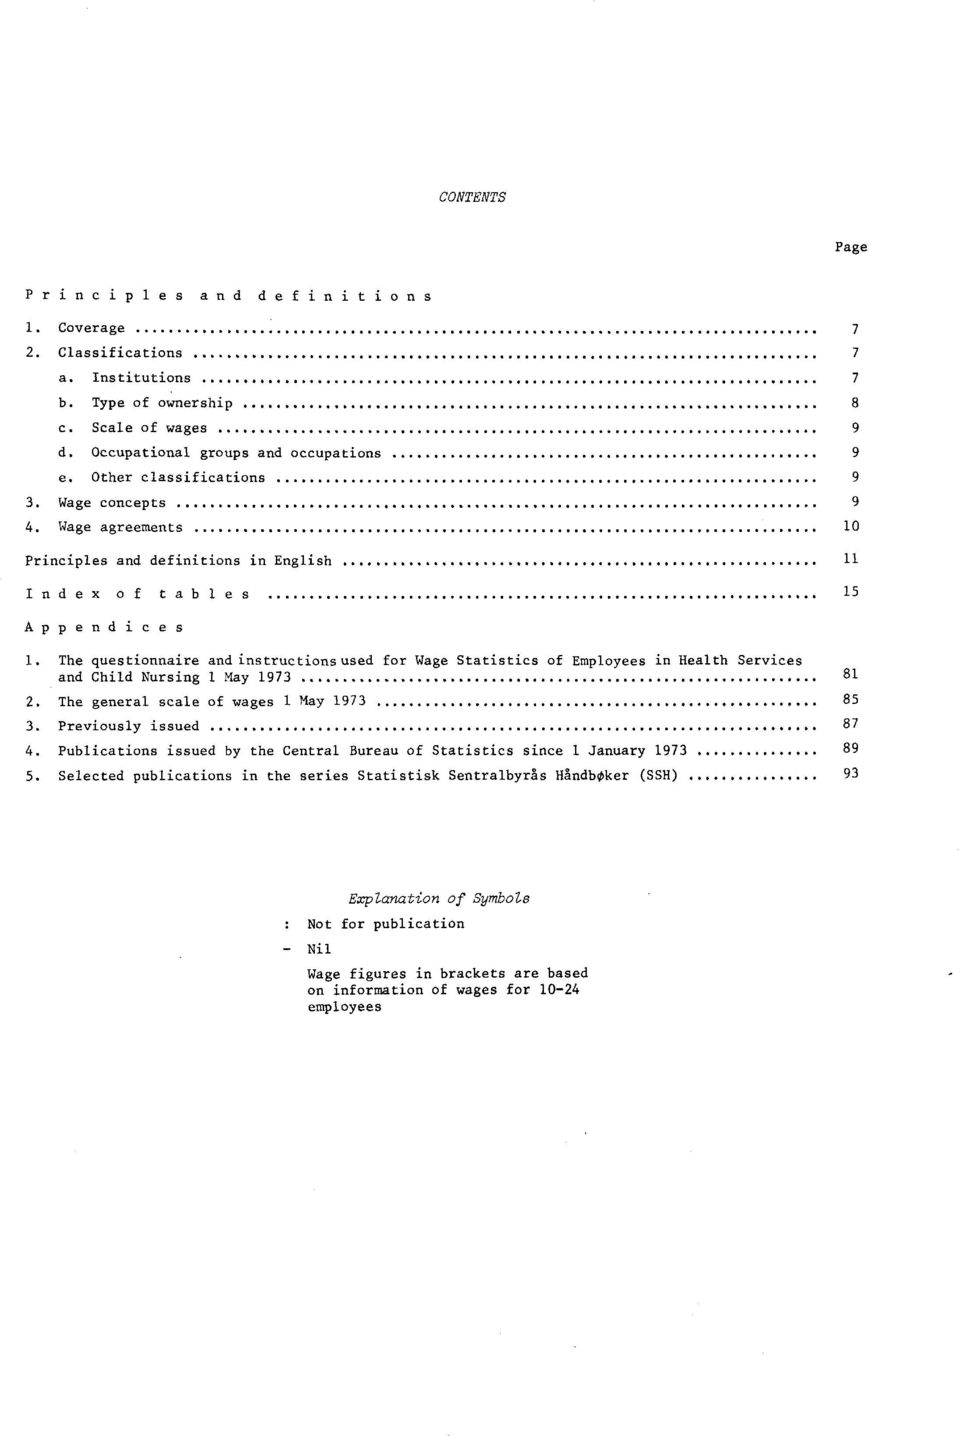 The questionnaire and instructionsused for Wage Statistics of Employees in Health Services and Child Nursing May 9. The general scale of wages May 9. Previously issued.